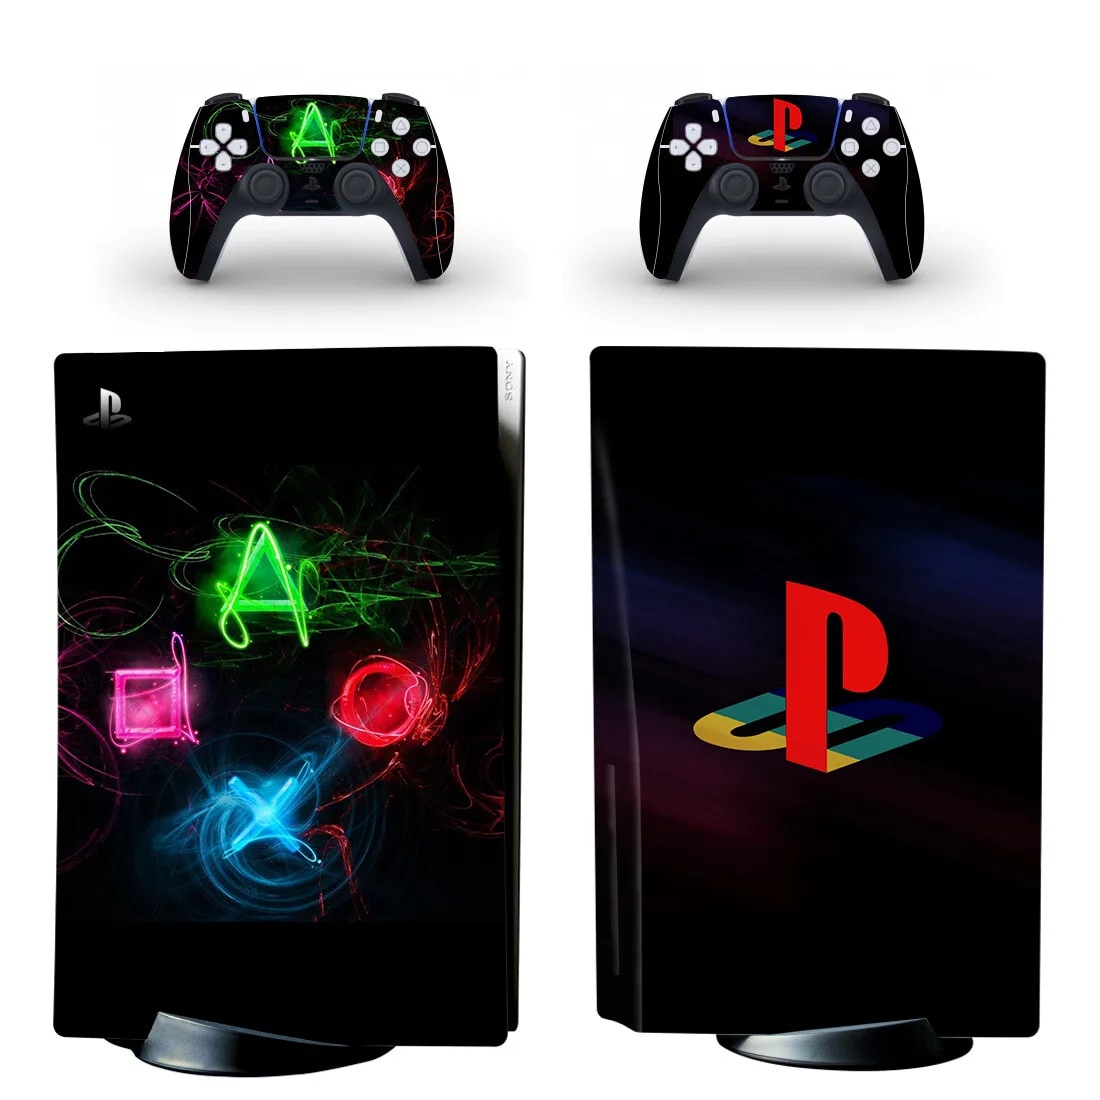 【Limited-time offer】 Symbol Logo Design Ps5 Standard Disc Skin Sticker Decal Cover For Console And Controllers Ps5 Skin Sticker Vinyl